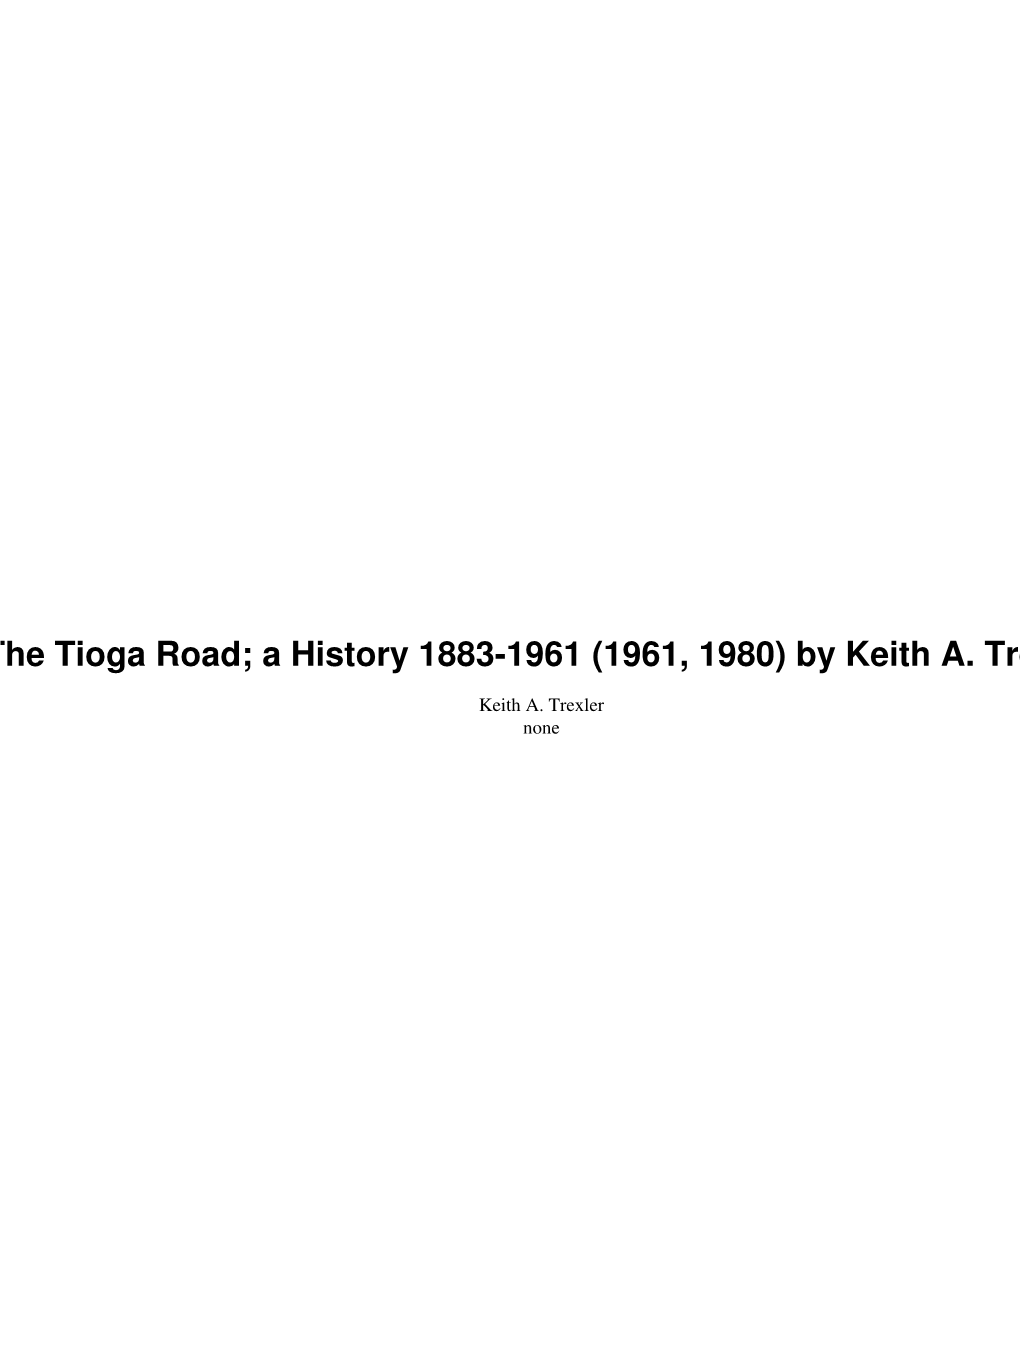 The Tioga Road; a History 1883-1961 (1961, 1980) by Keith A. Trexler